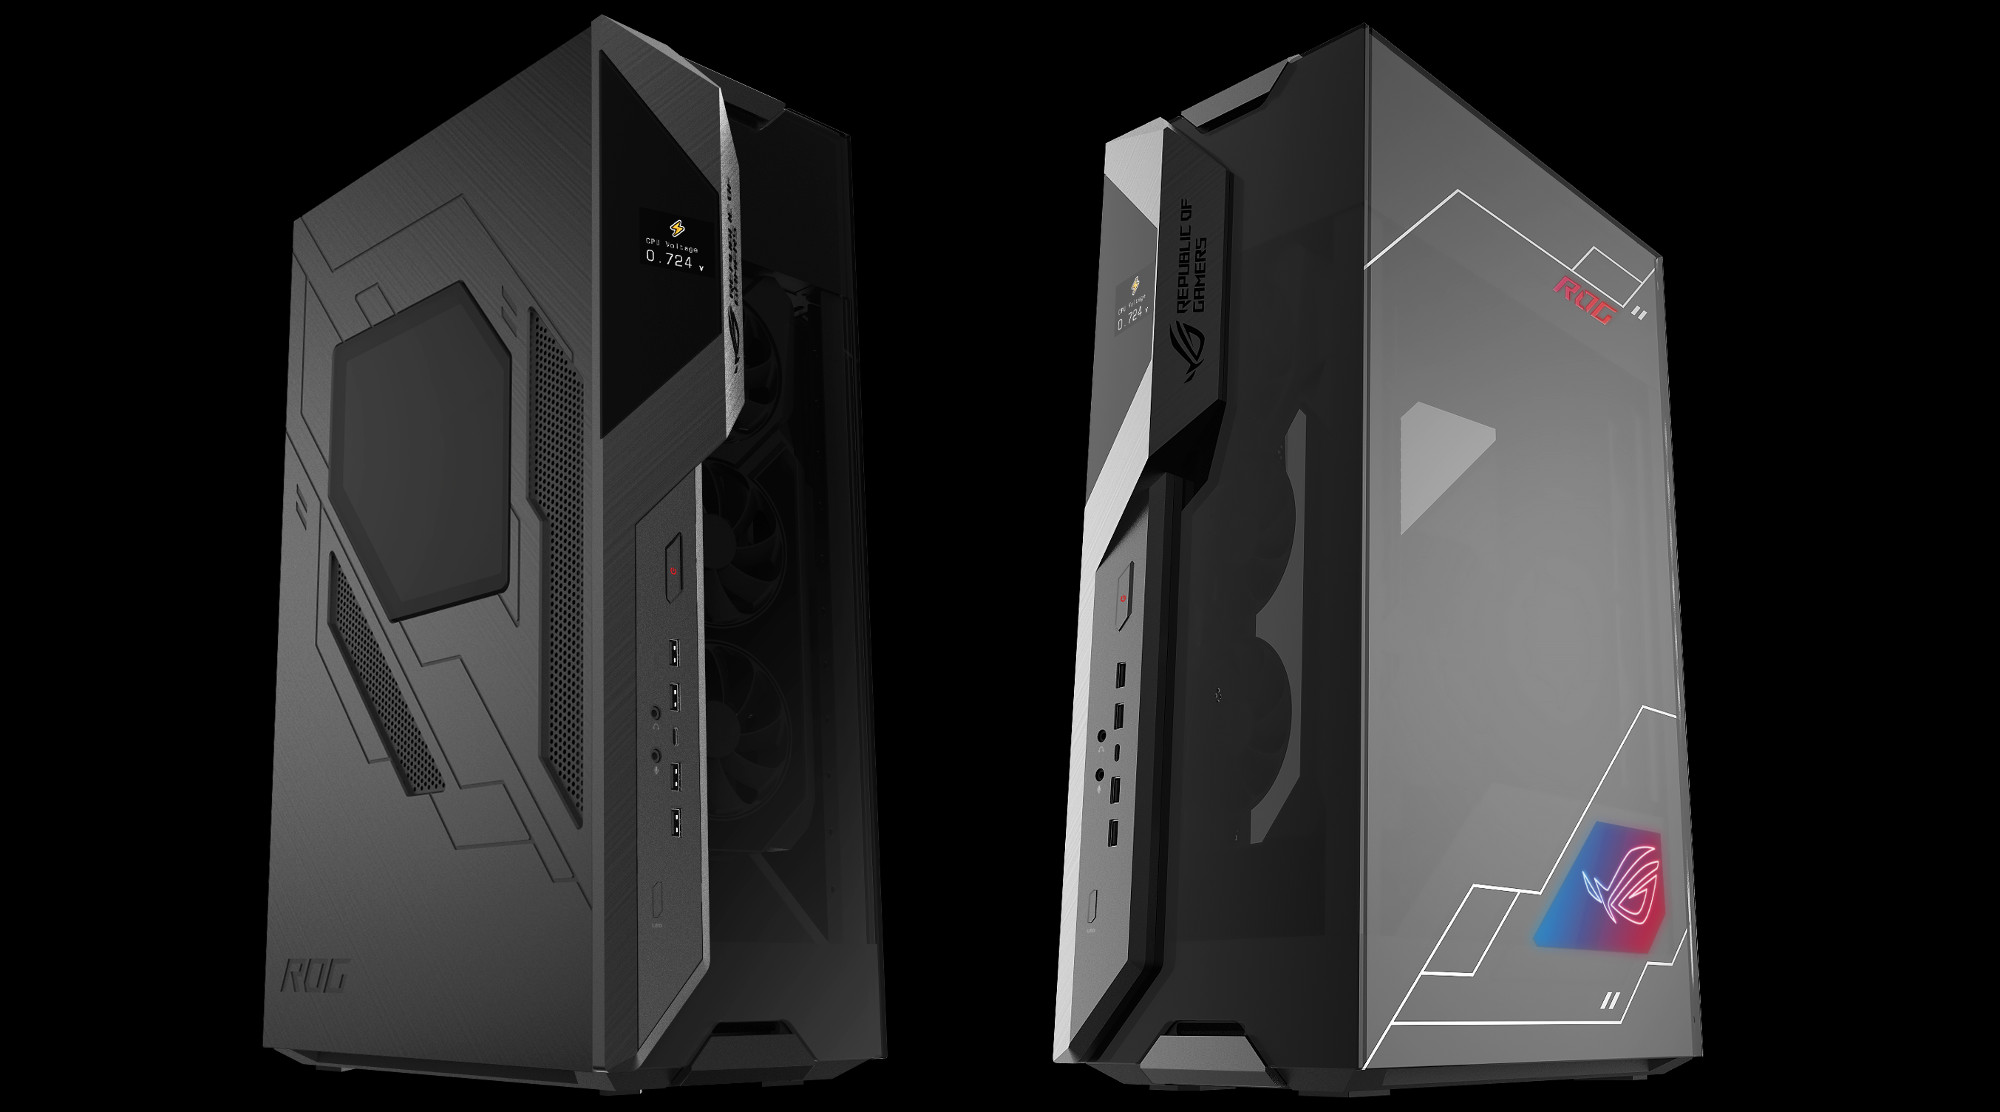 The Rog Itx Concept Case Is Designed For Serious Enthusiasts Rog Republic Of Gamers Global